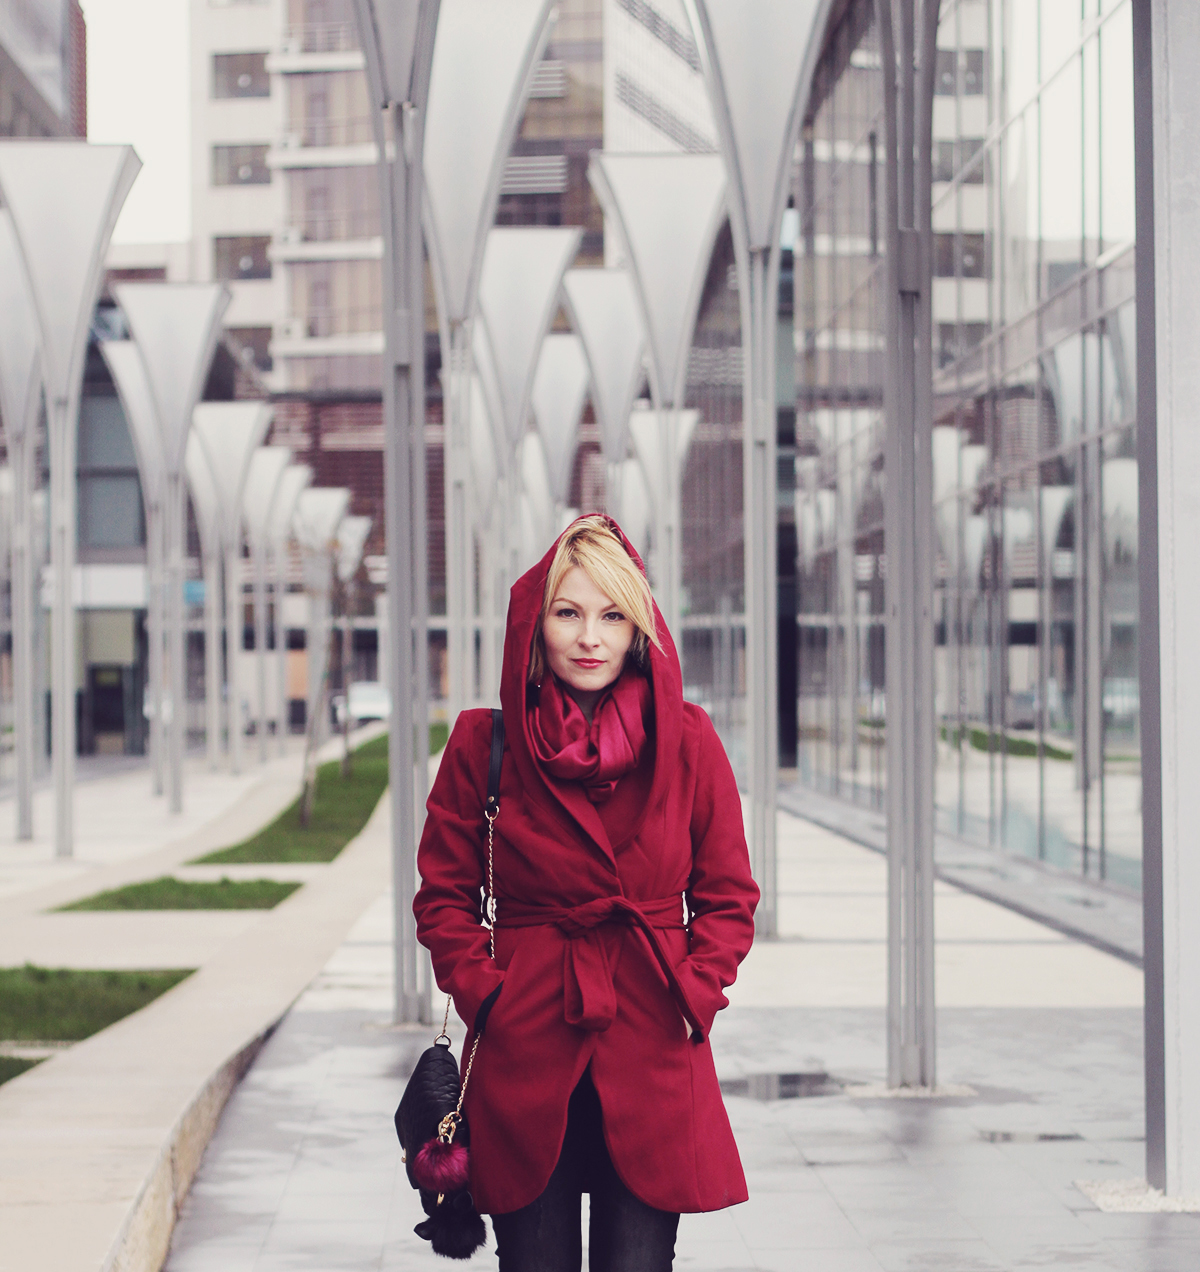 the burgundy coat and scarf